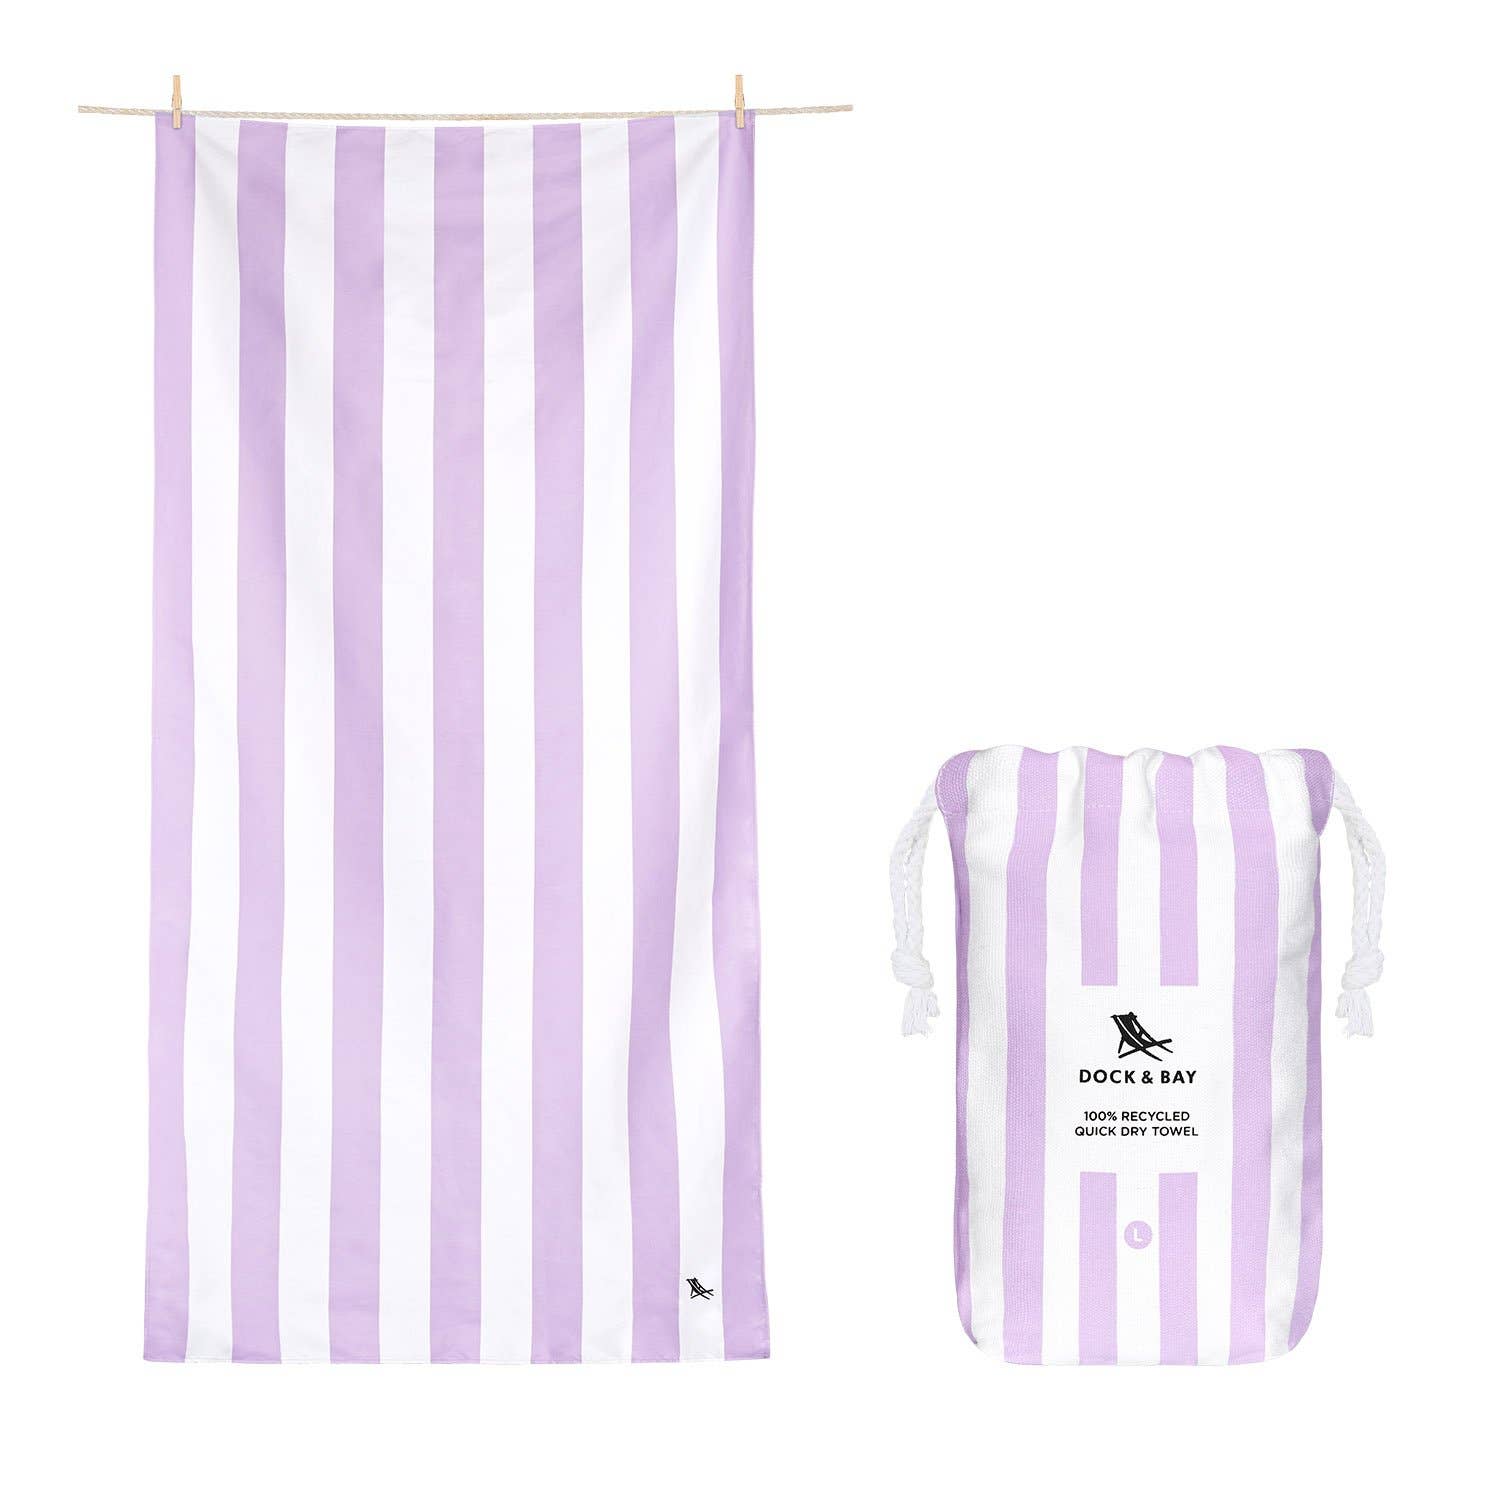 Cabana Stripe in Lombok Lilac Beach Towel - 2 sizes available - The Preppy Bunny